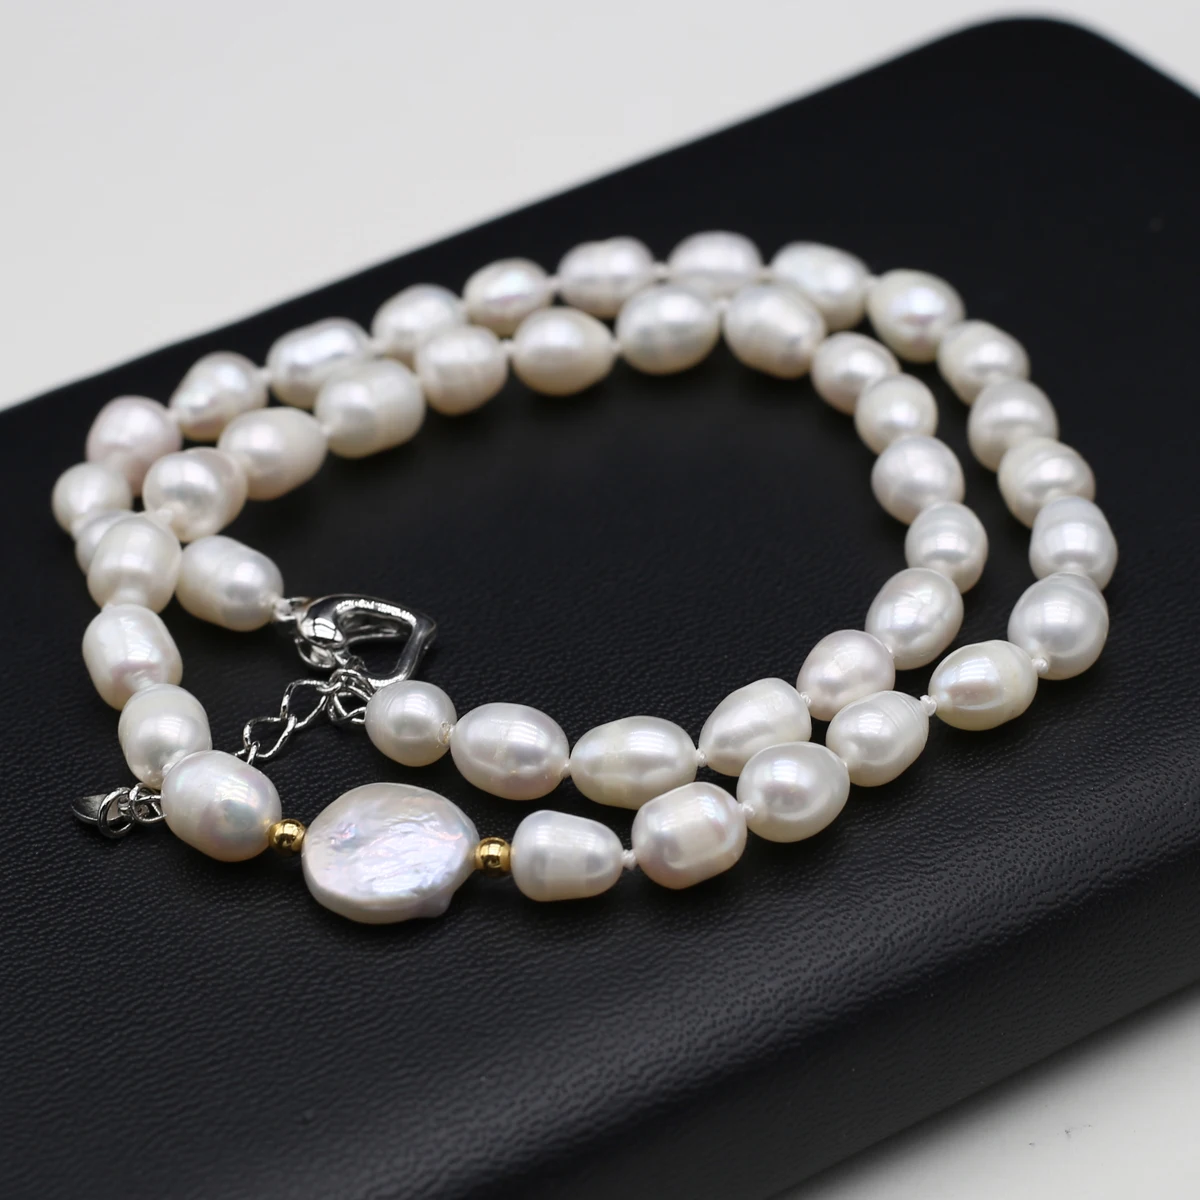 

8-9mm Natural Freshwater Pearl Chokers Necklaces Big White Pearls Jewelry Necklace For Women Fashion Engagement Gift